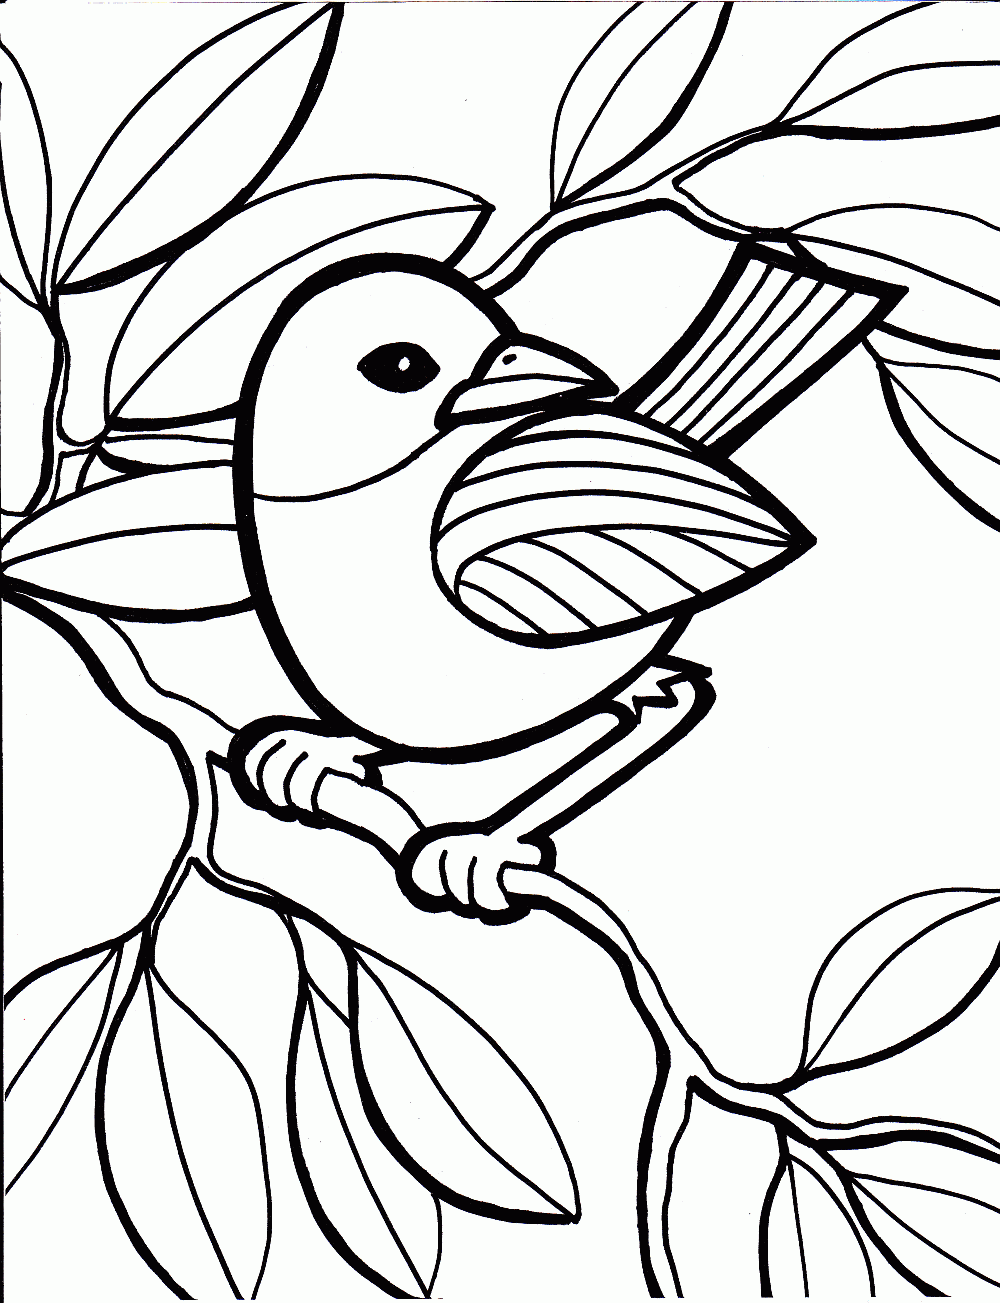 Coloring for Kids - Bird Coloring ~ Child Coloring